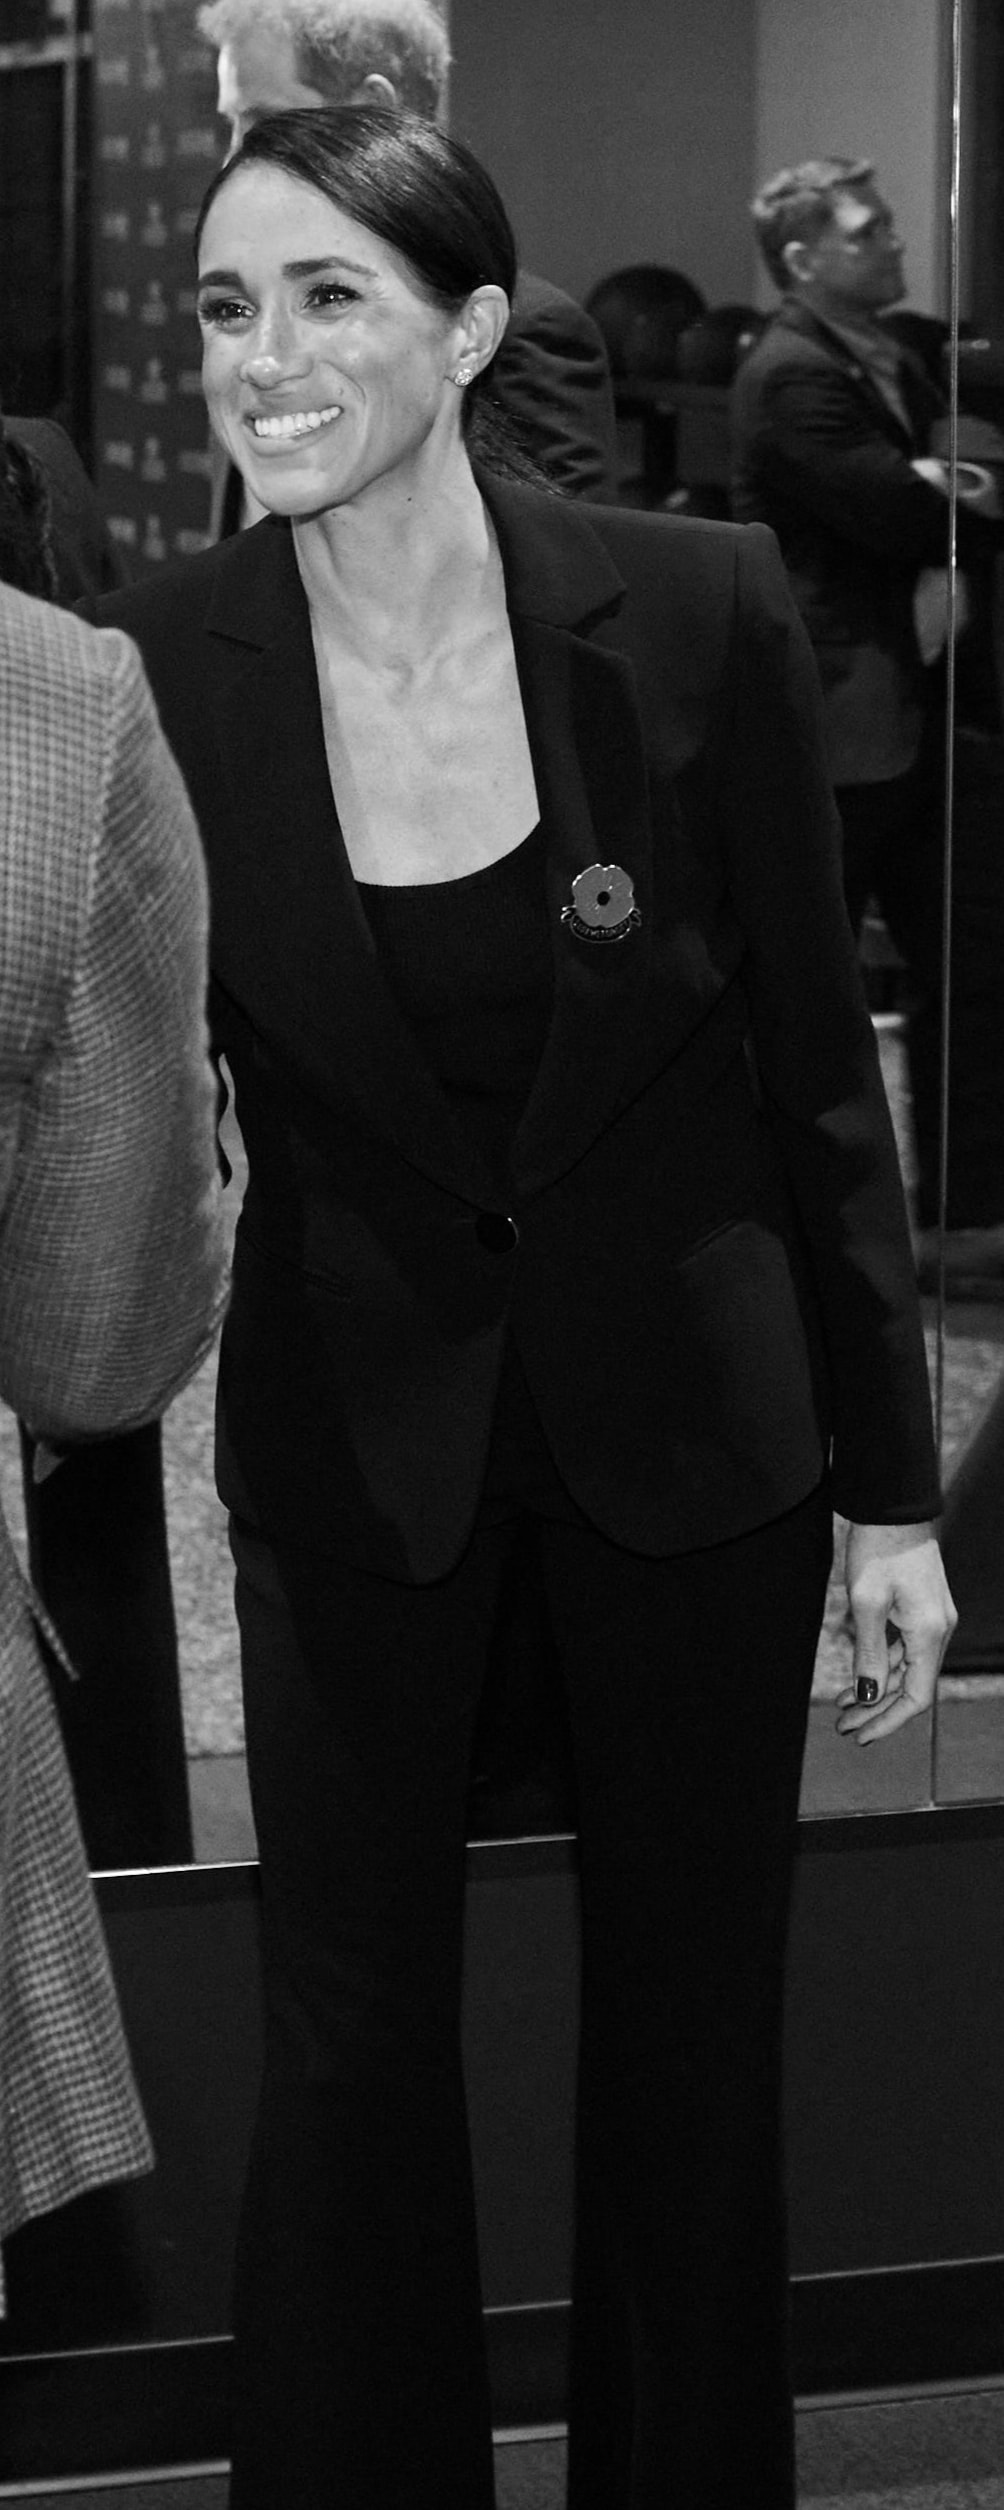 Giorgio Armani Mulberry Silk Single-Breasted Jacket in Black as seen on Meghan Markle, Duchess of Sussex.